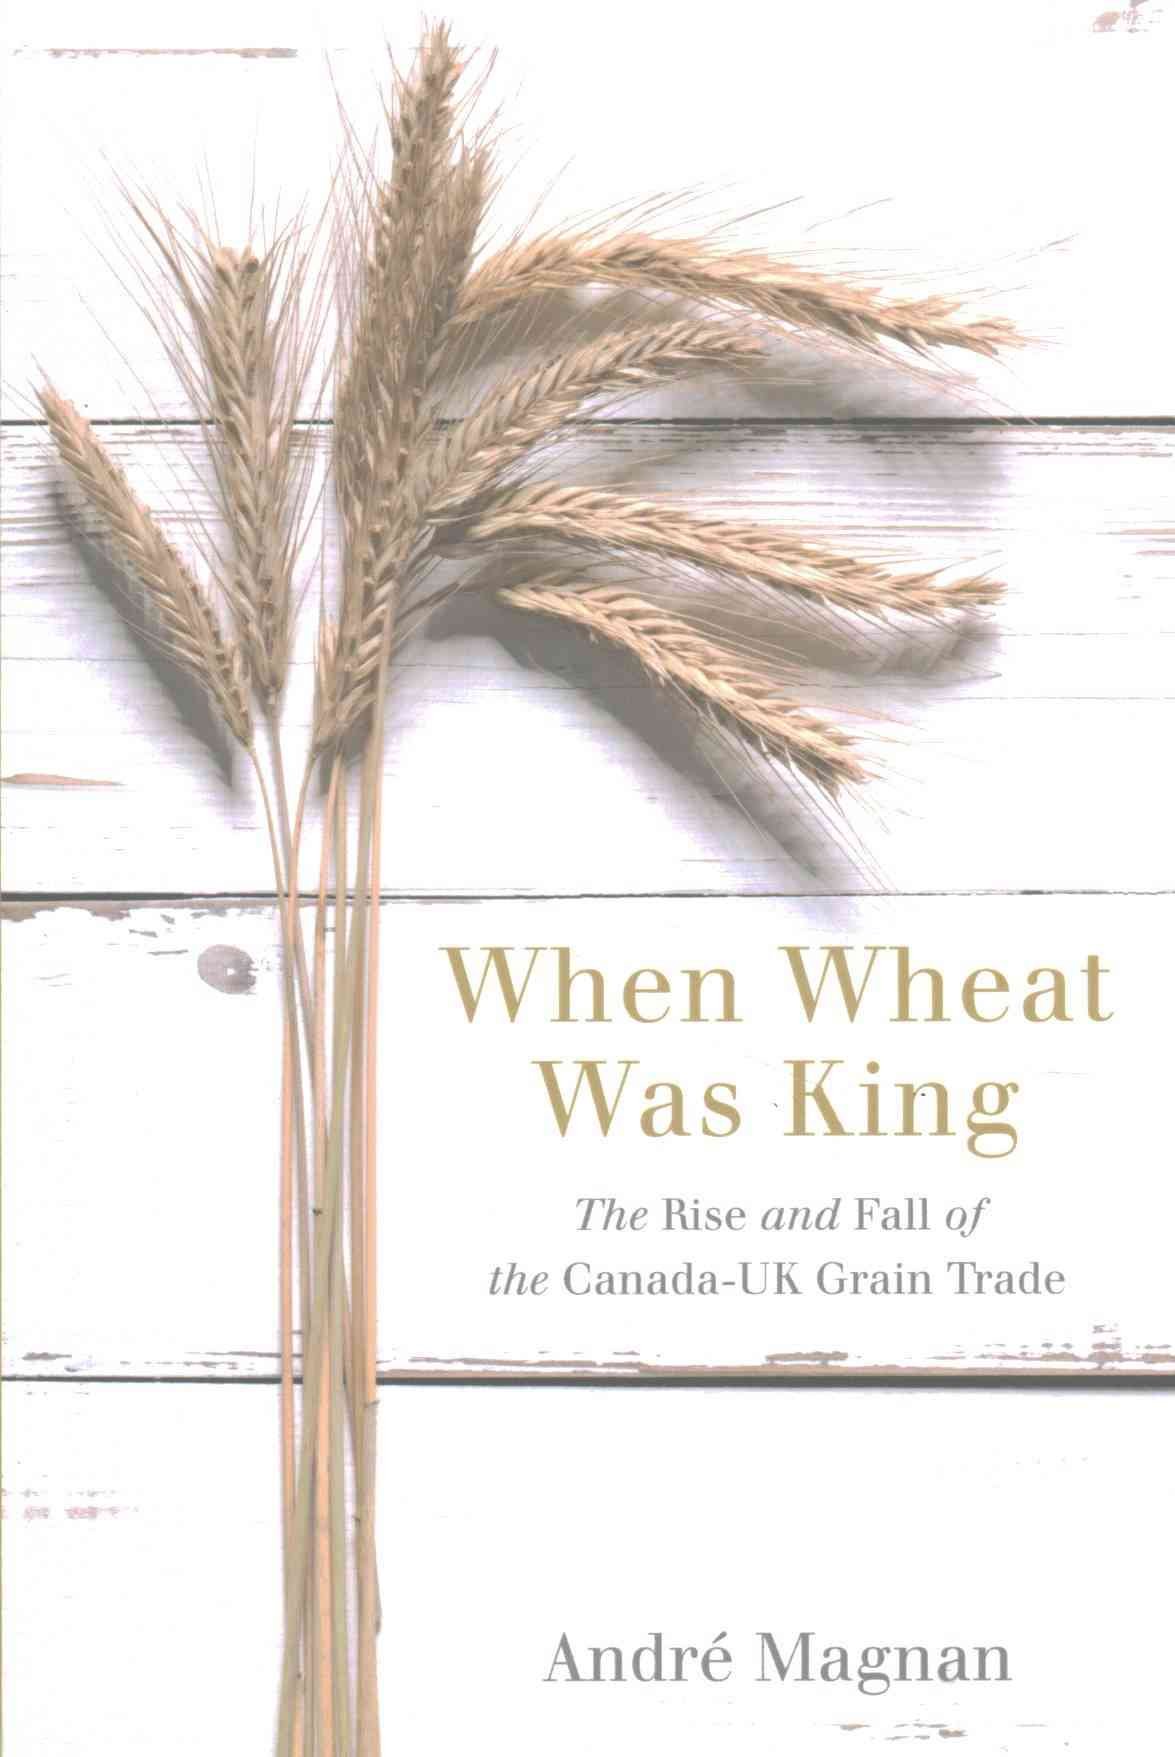 When Wheat Was King